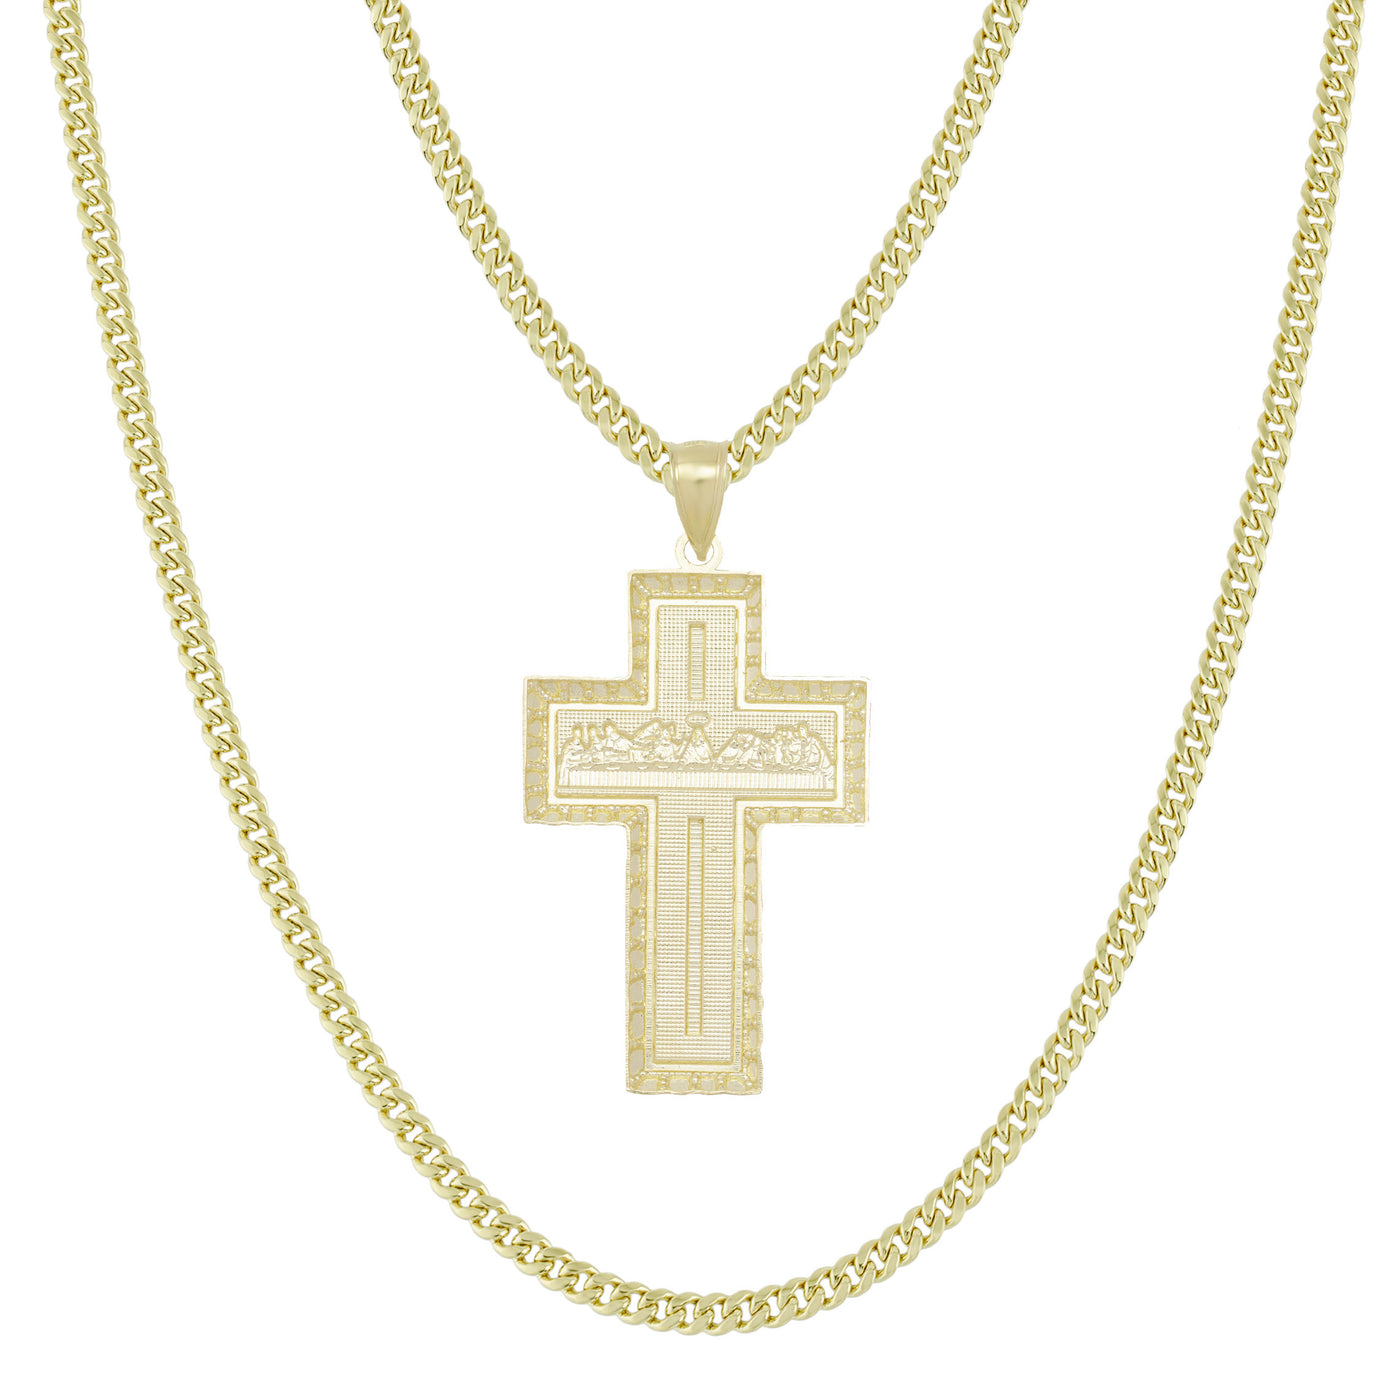 Last Supper Textured Cross Pendant & Chain Necklace Set 10K Yellow Gold